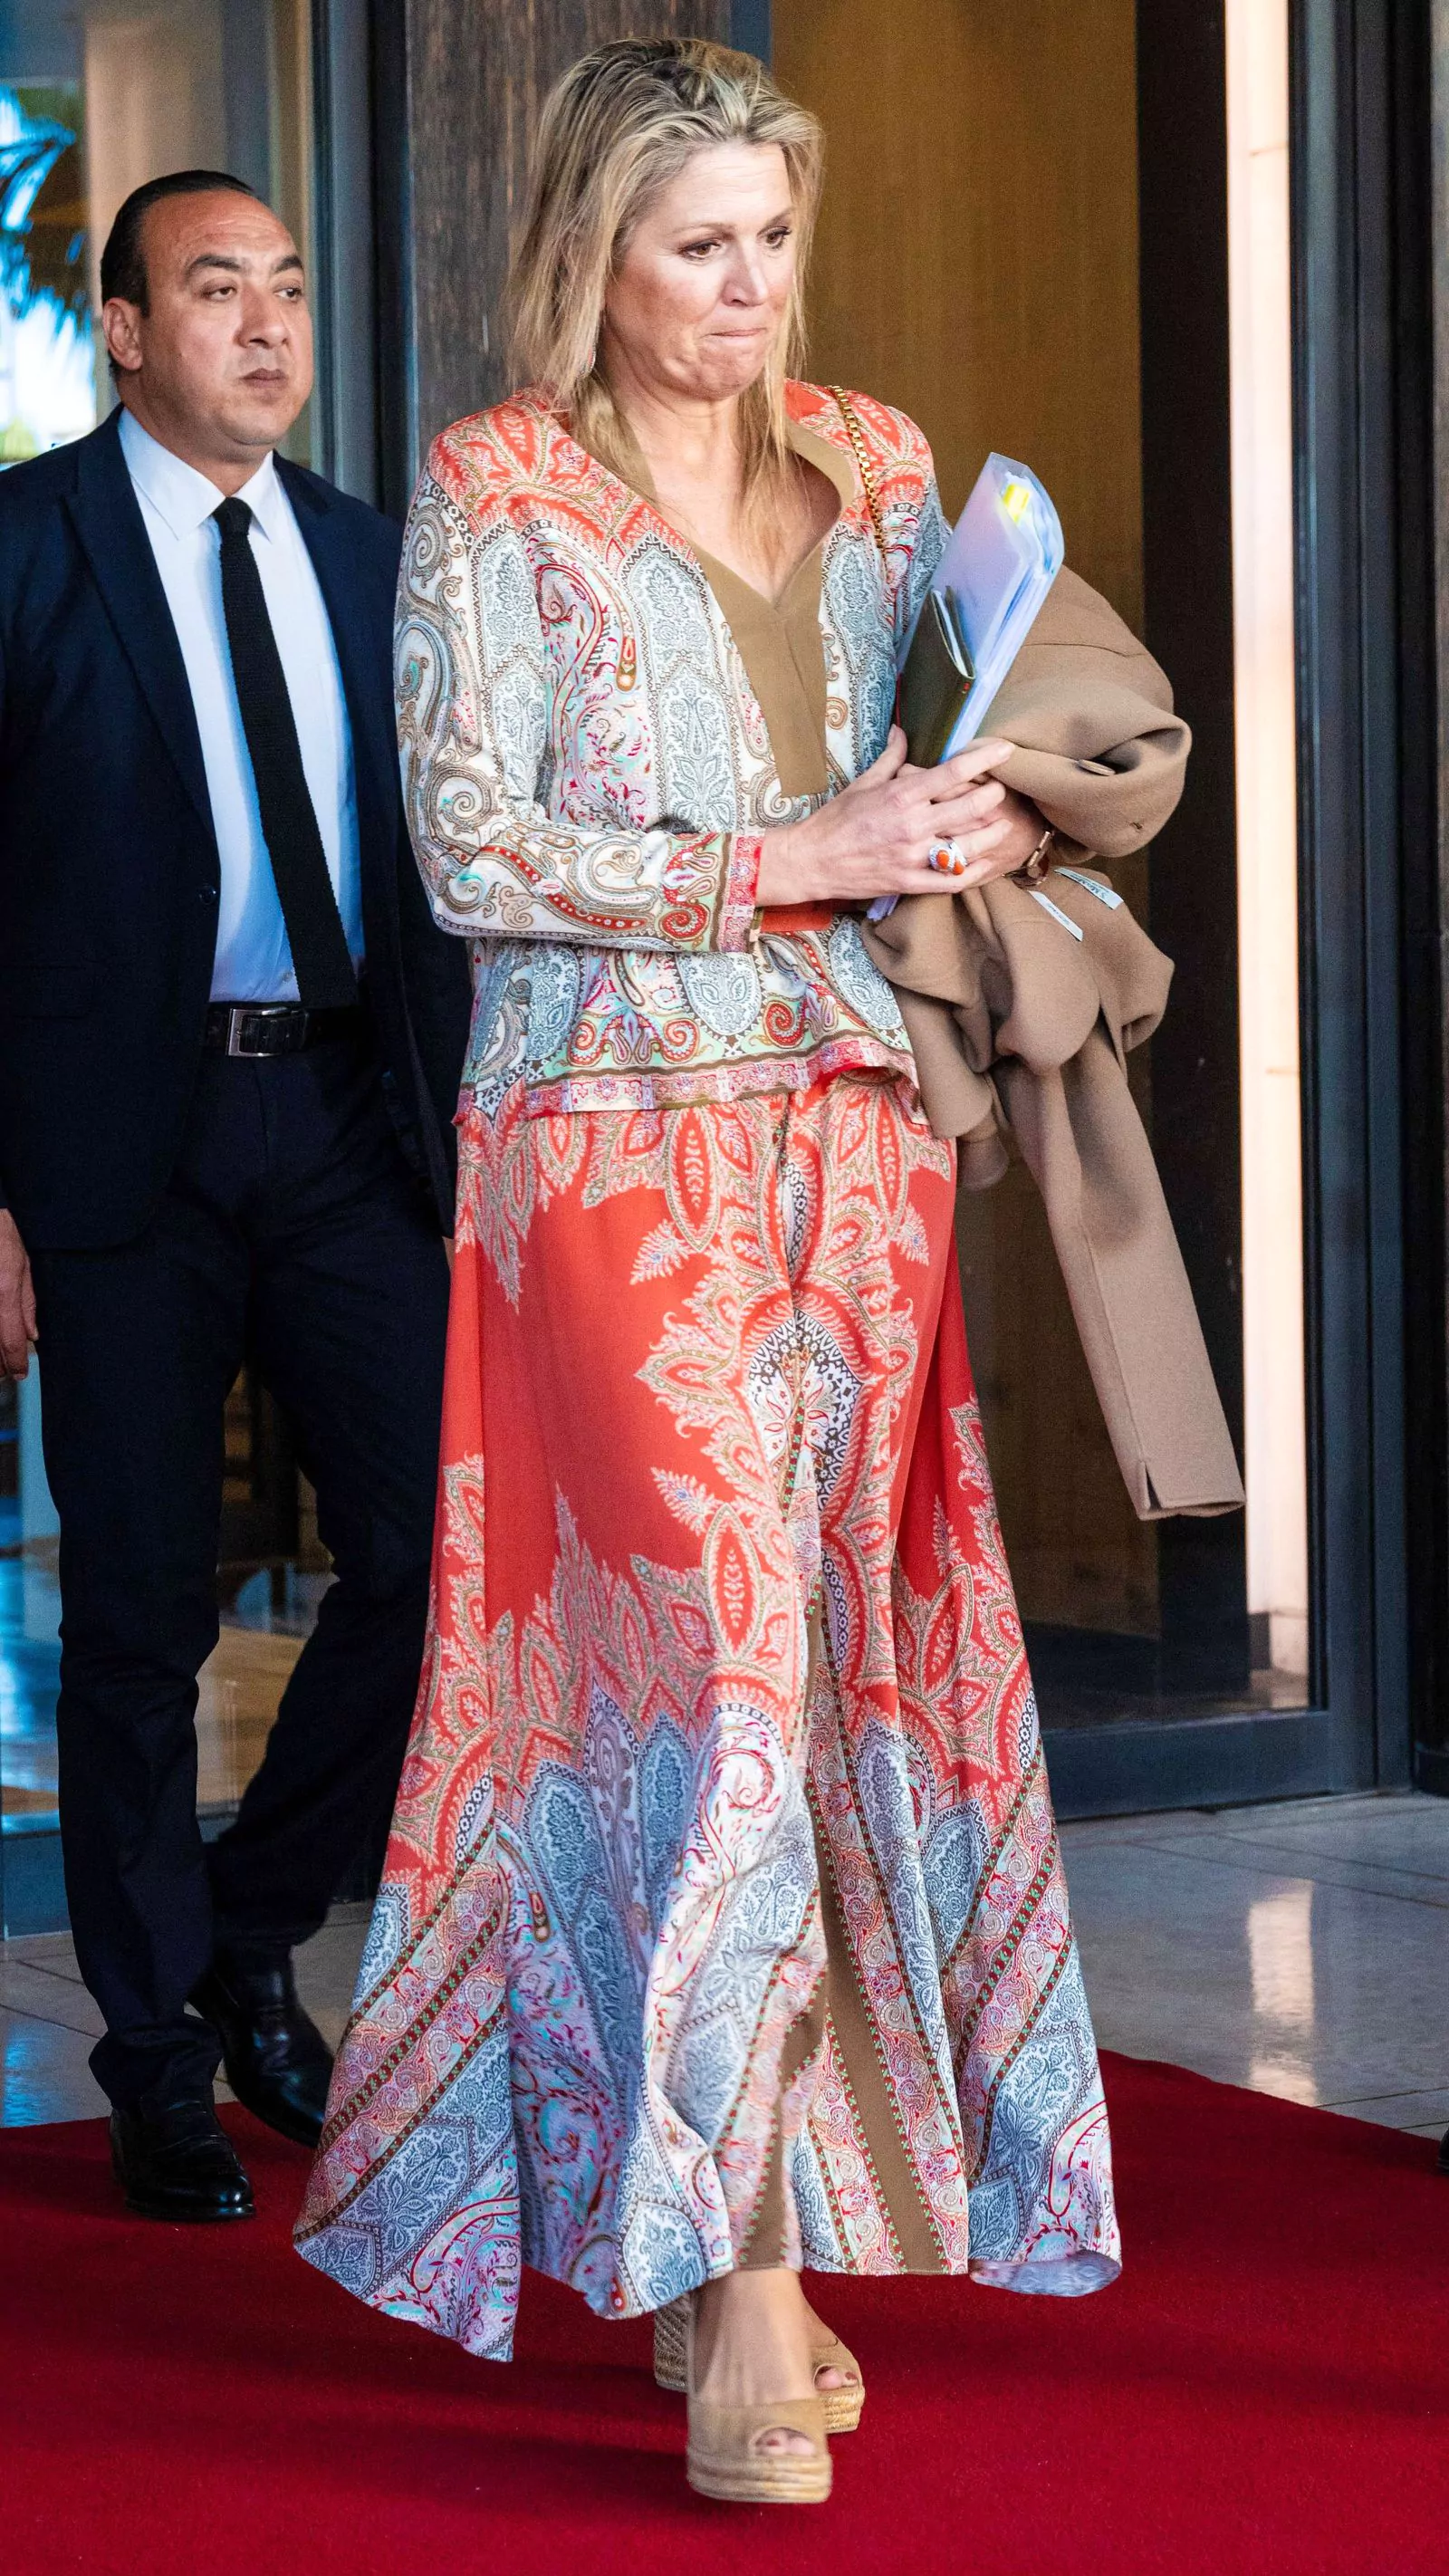 Queen Maxima during her visit to the Bank of Africa in Casablanca on the first day of a three-day visit to Morocco, March 20, 2023.